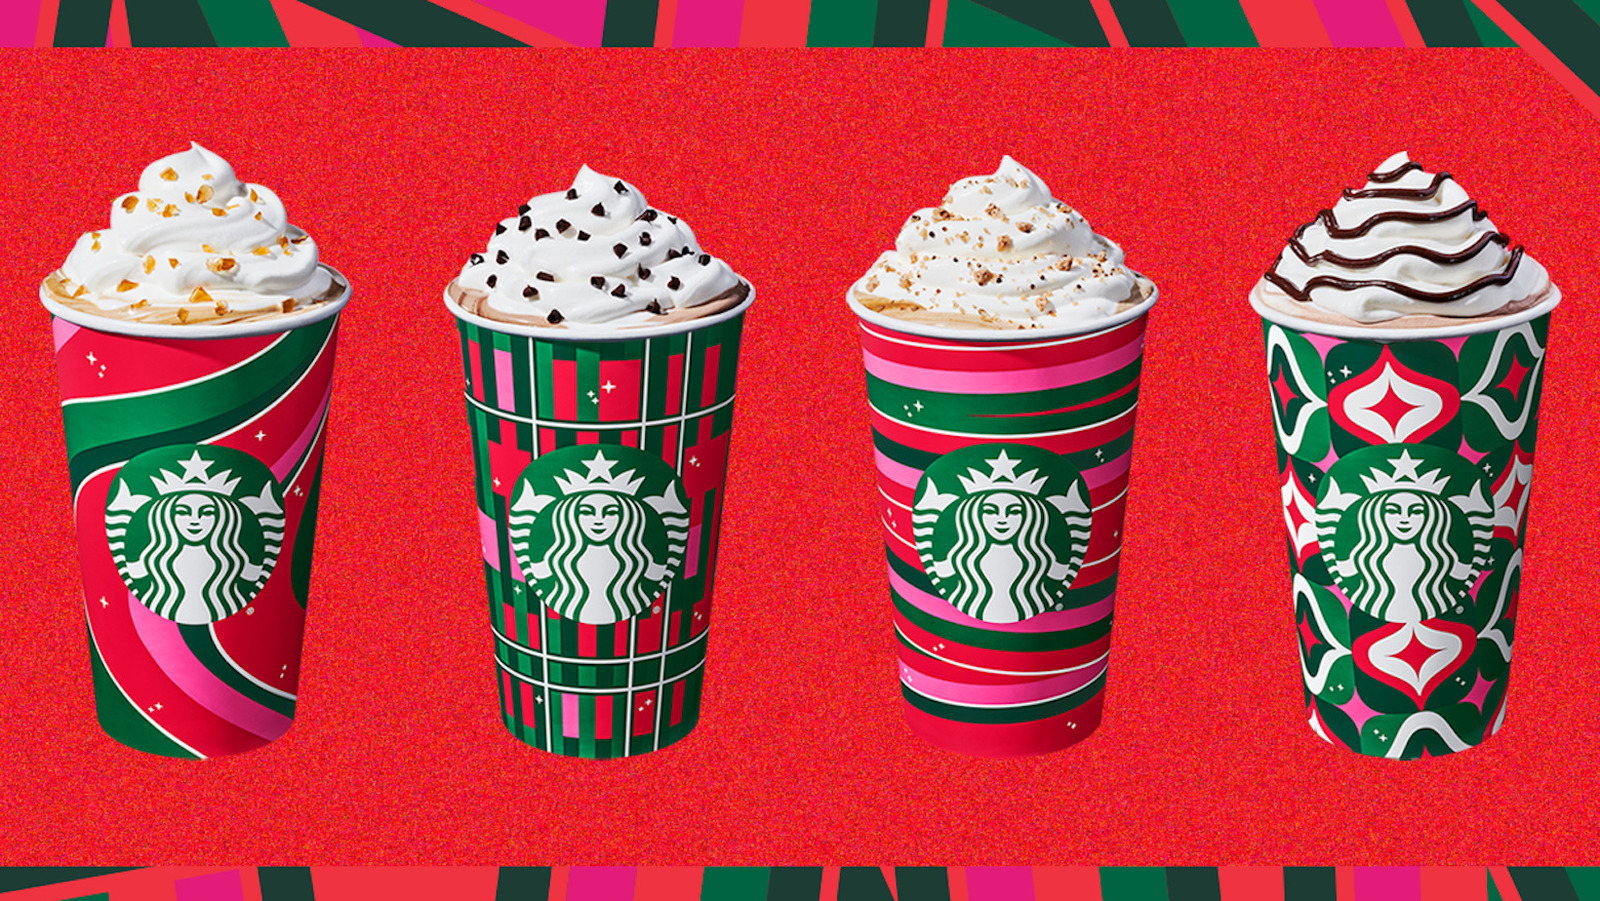 Starbucks Goes Full Holiday Mode With New Menu Items, Cocktails